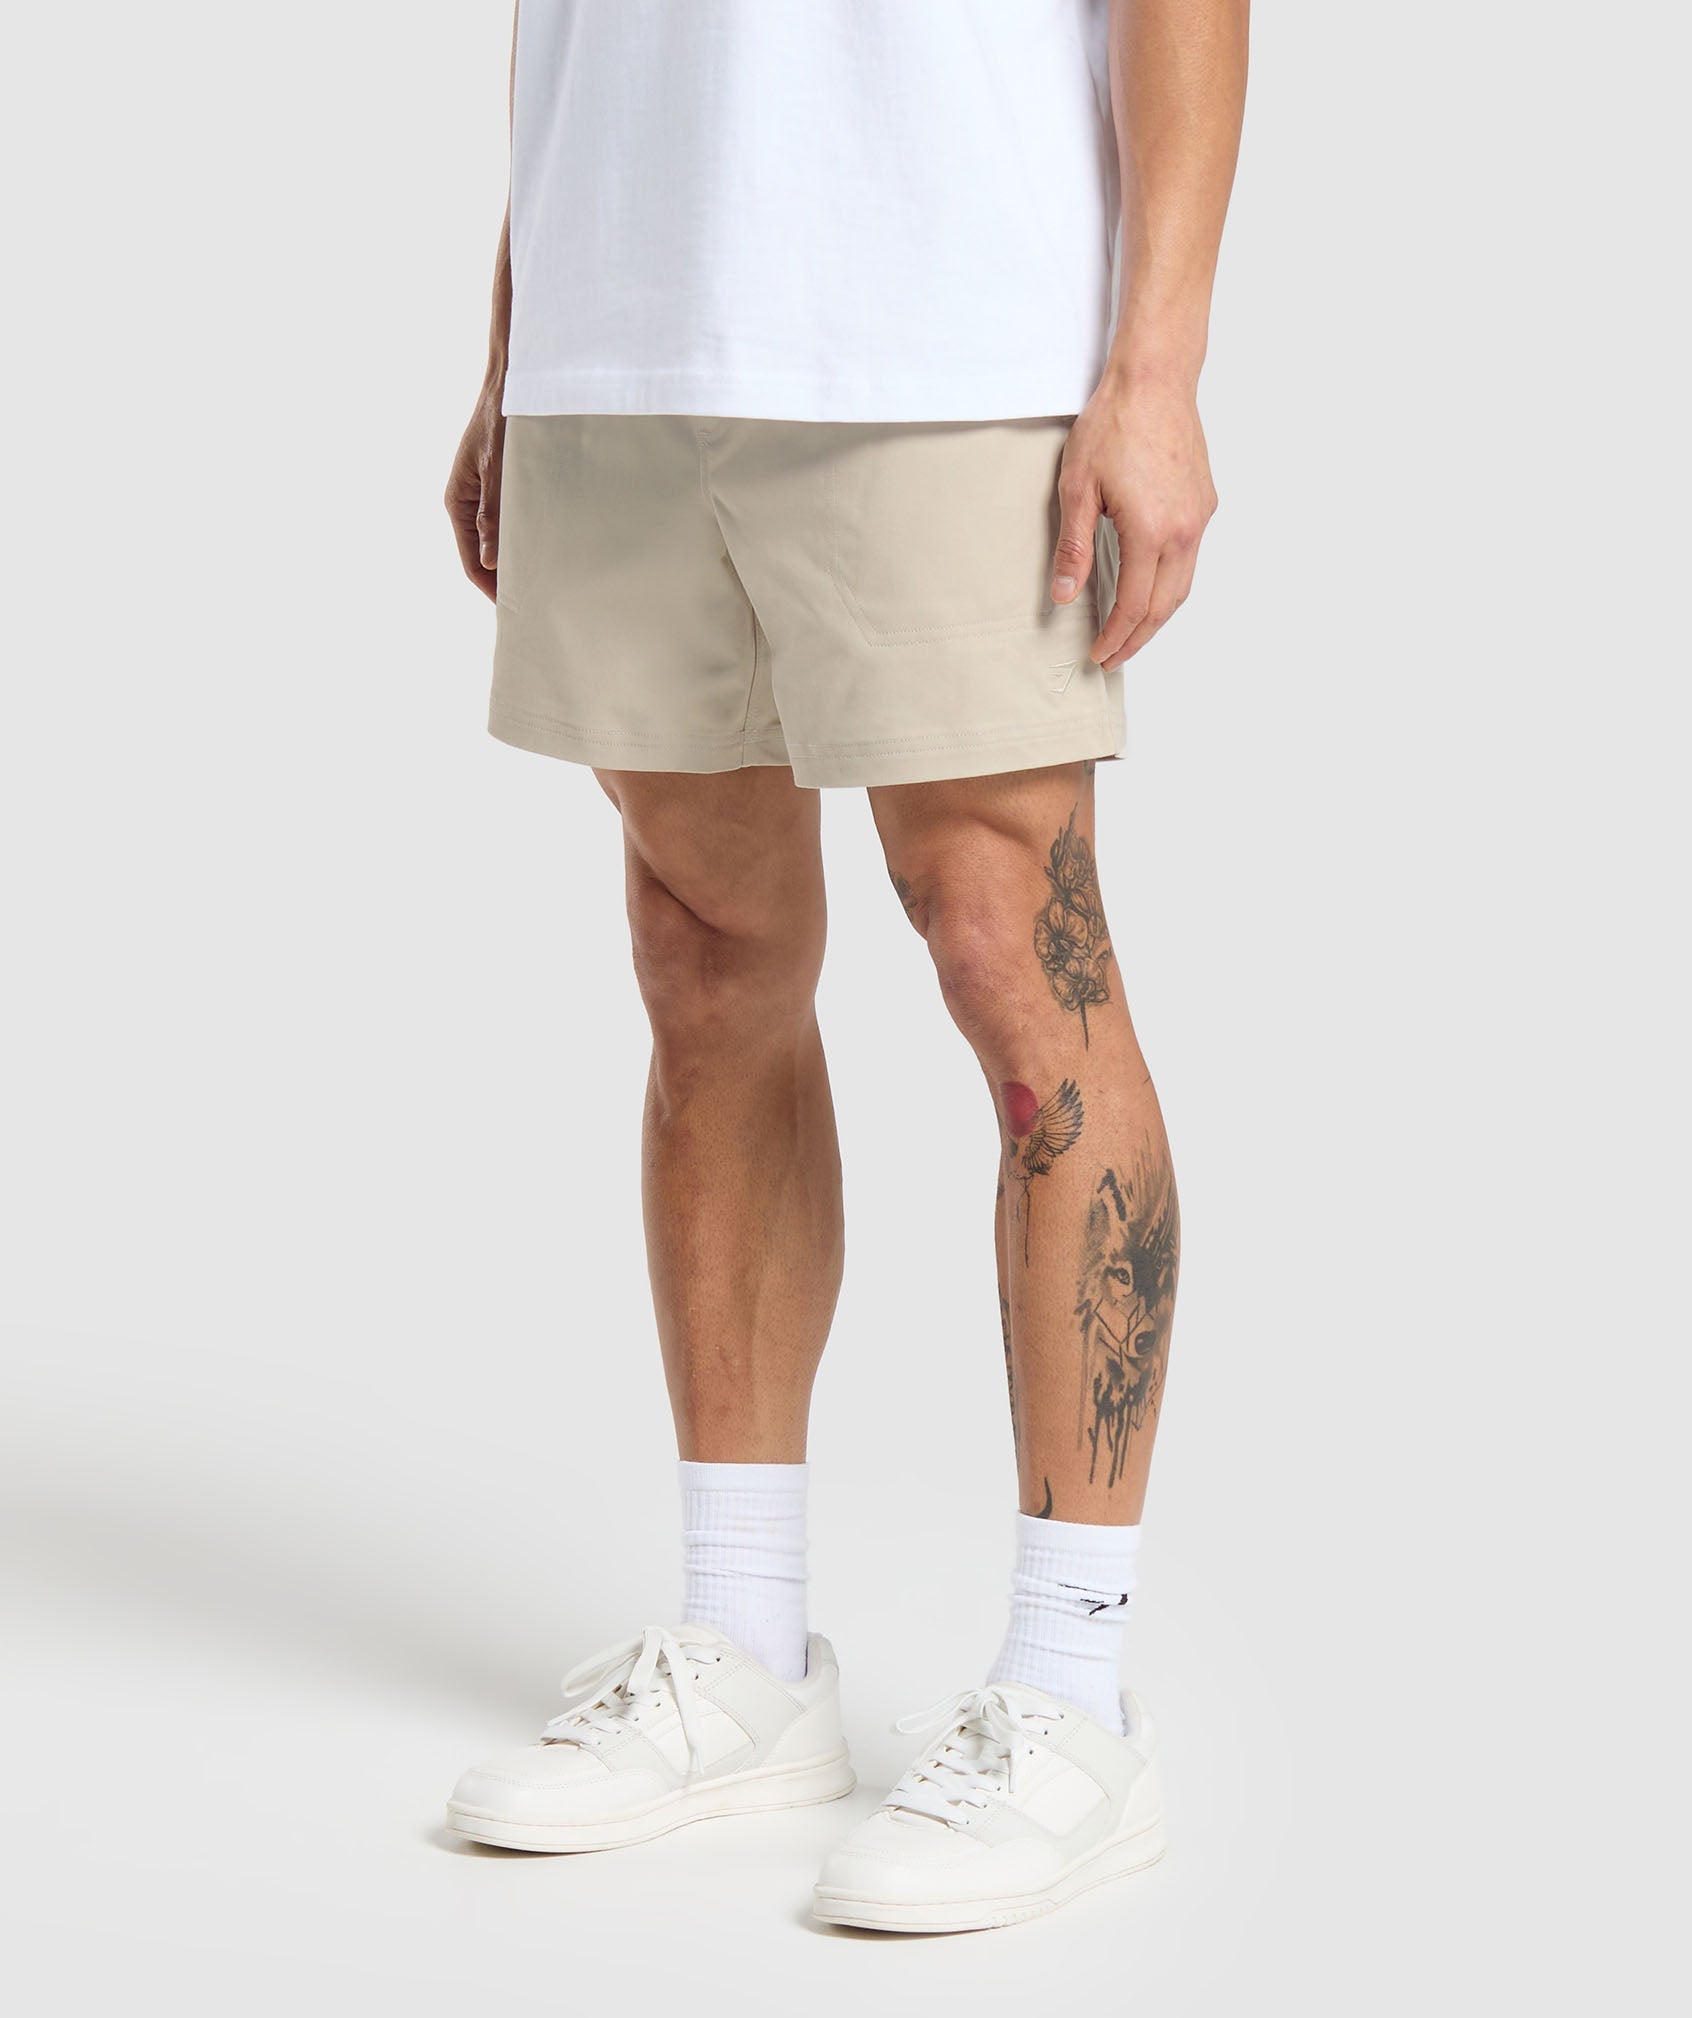 Rest Day Woven Shorts in Pebble Grey - view 3